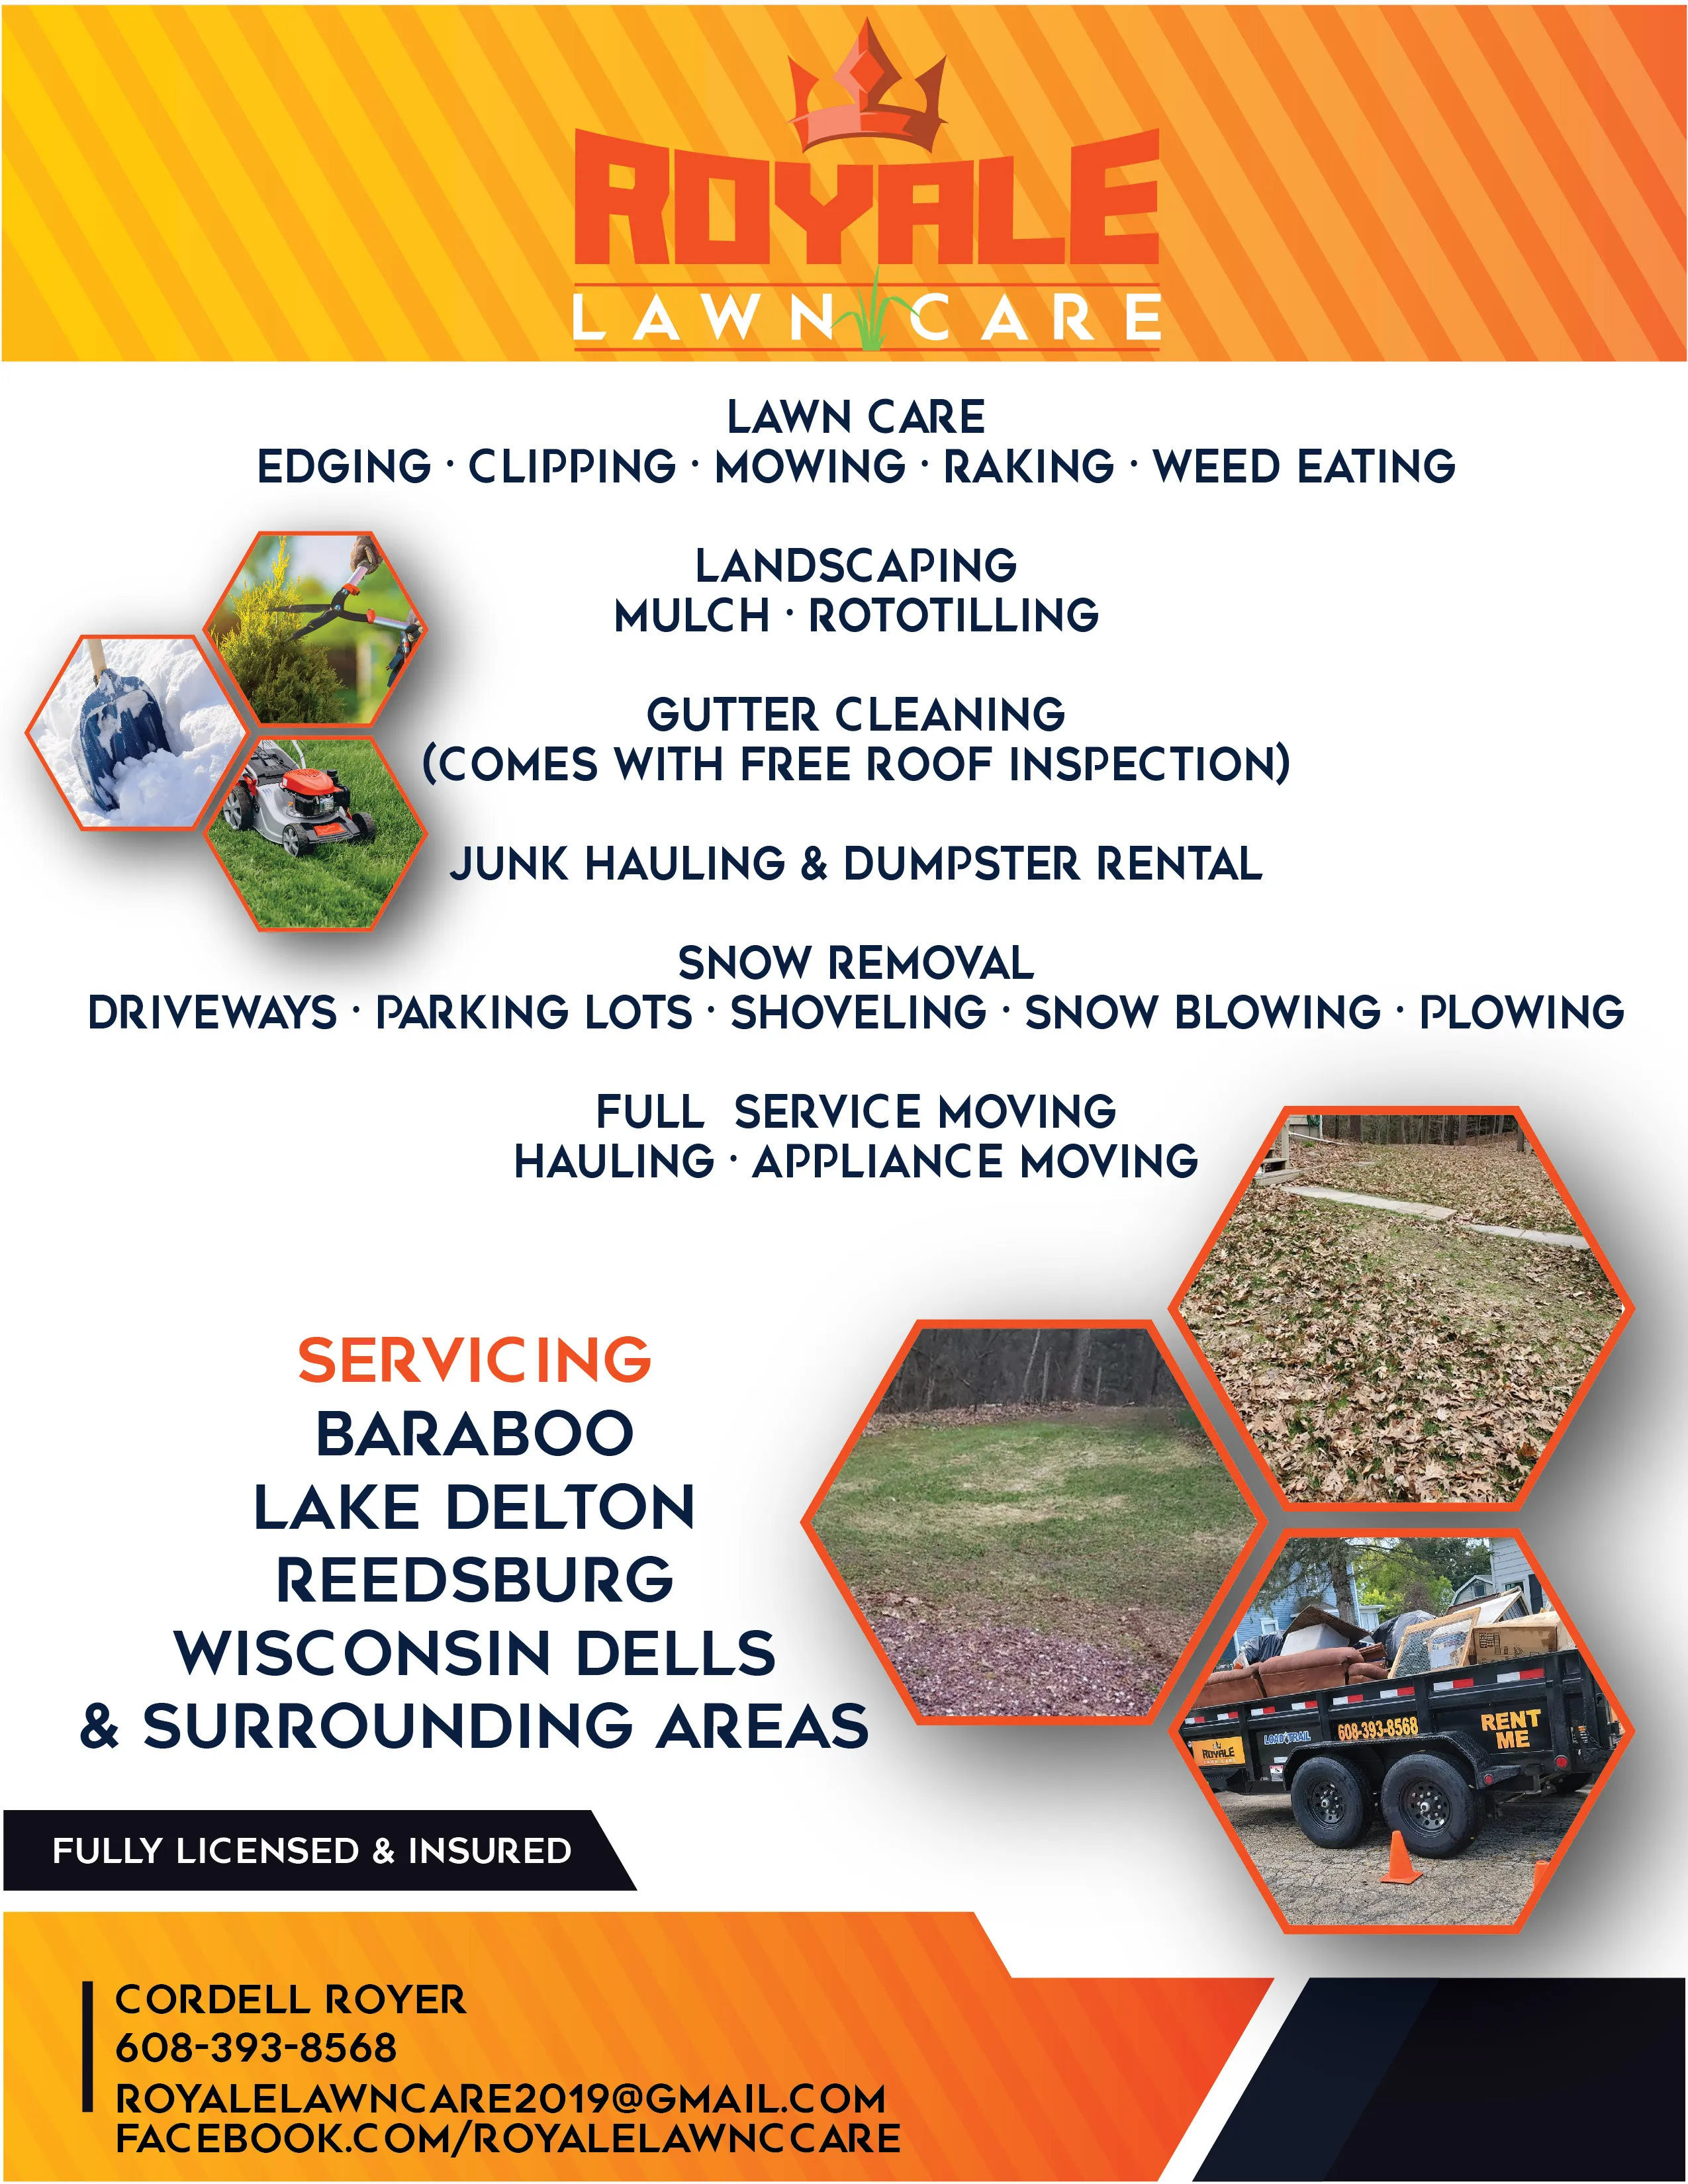 Other Services for Royale Lawn Care and Maintenance LLC in Reedsburg, WI